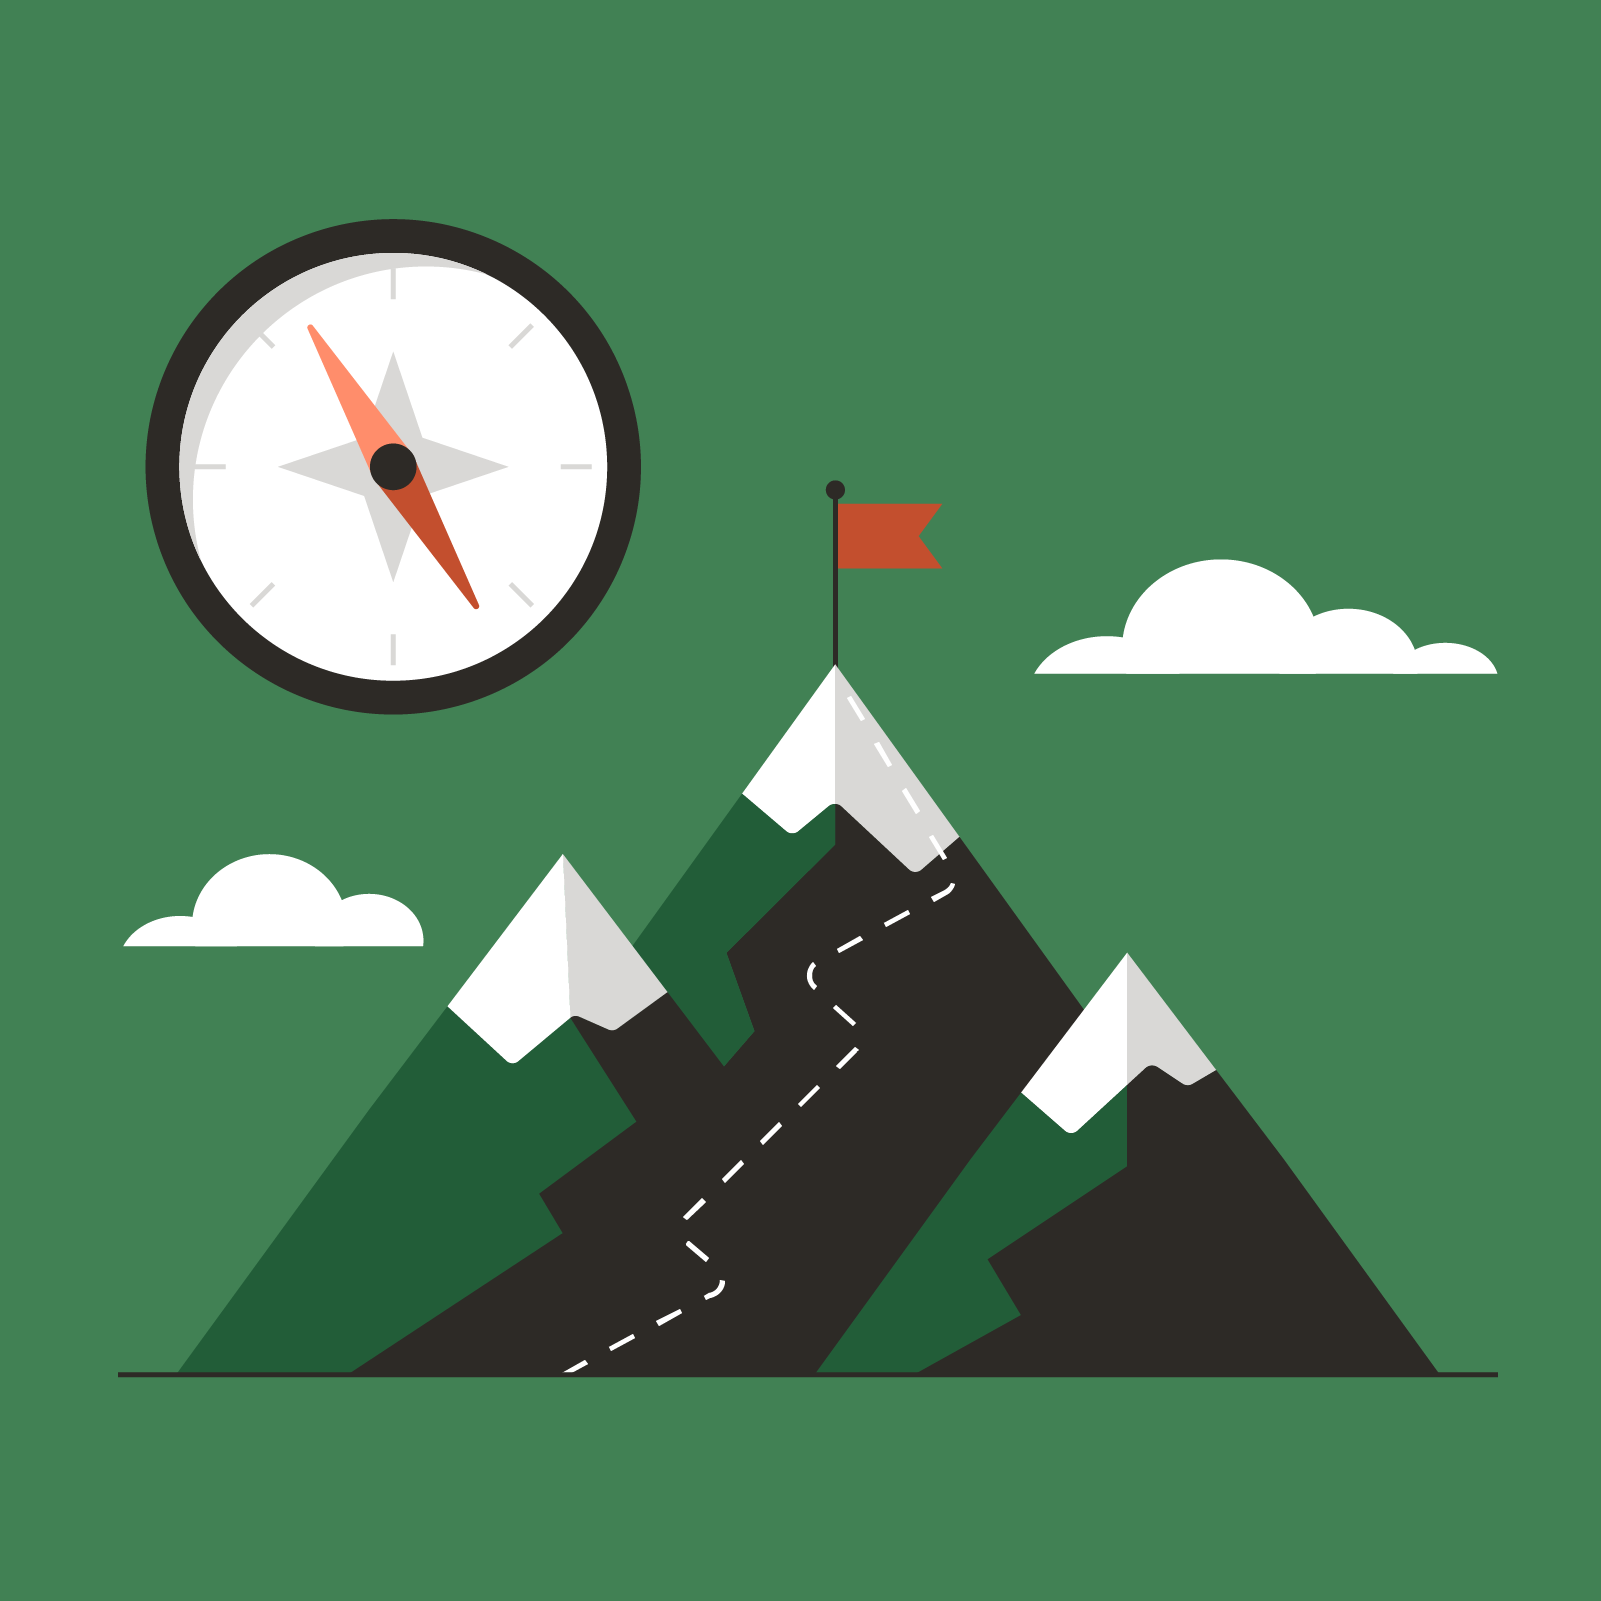 An illustration of a green mountain with a red flag at the summit, with a path leading up to the summit; next to it is a compass